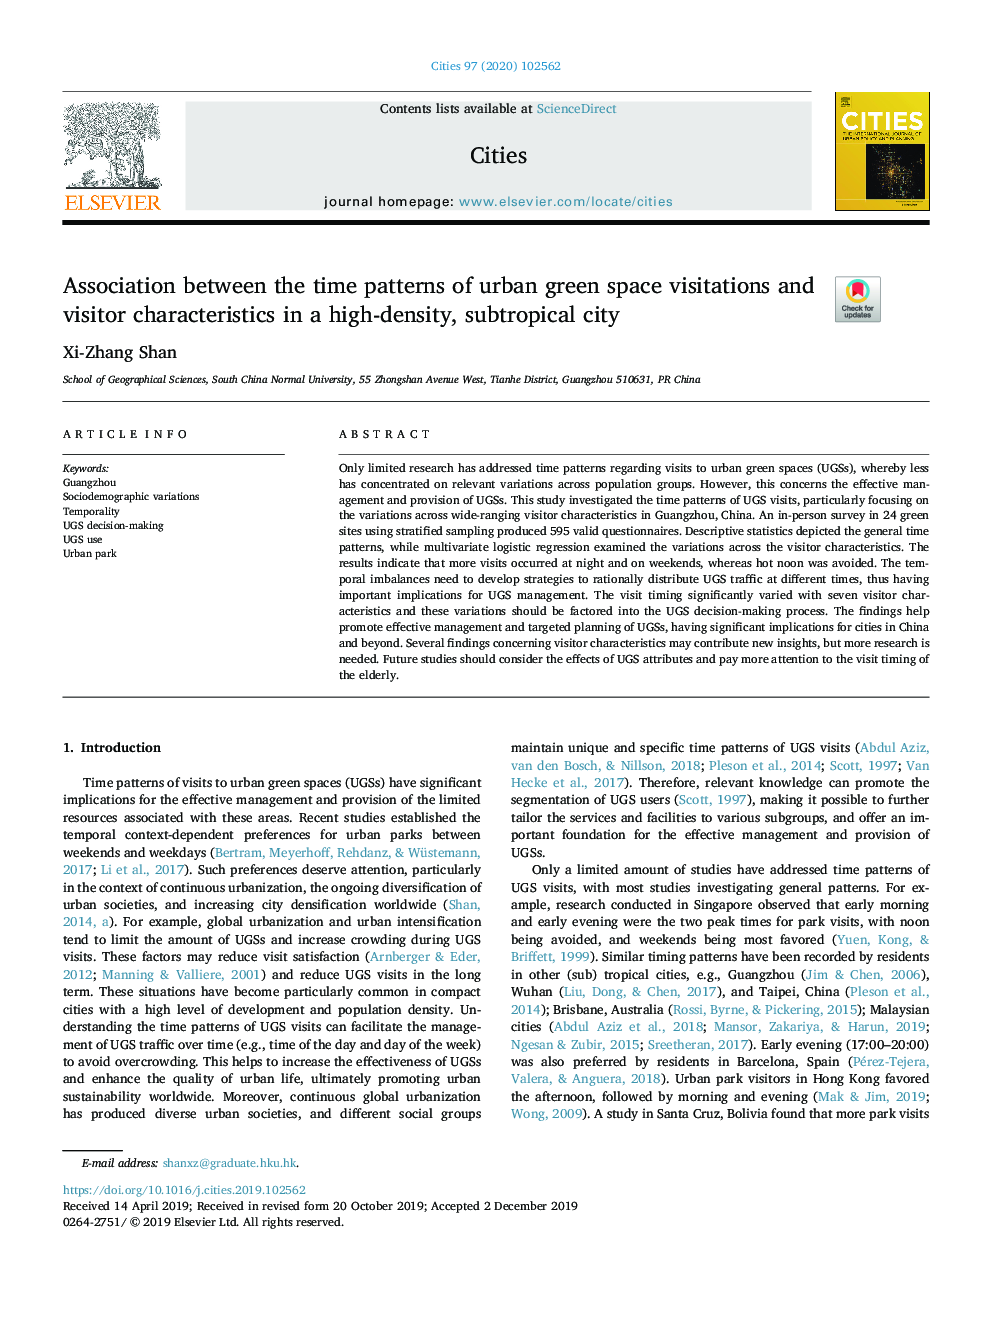 Association between the time patterns of urban green space visitations and visitor characteristics in a high-density, subtropical city